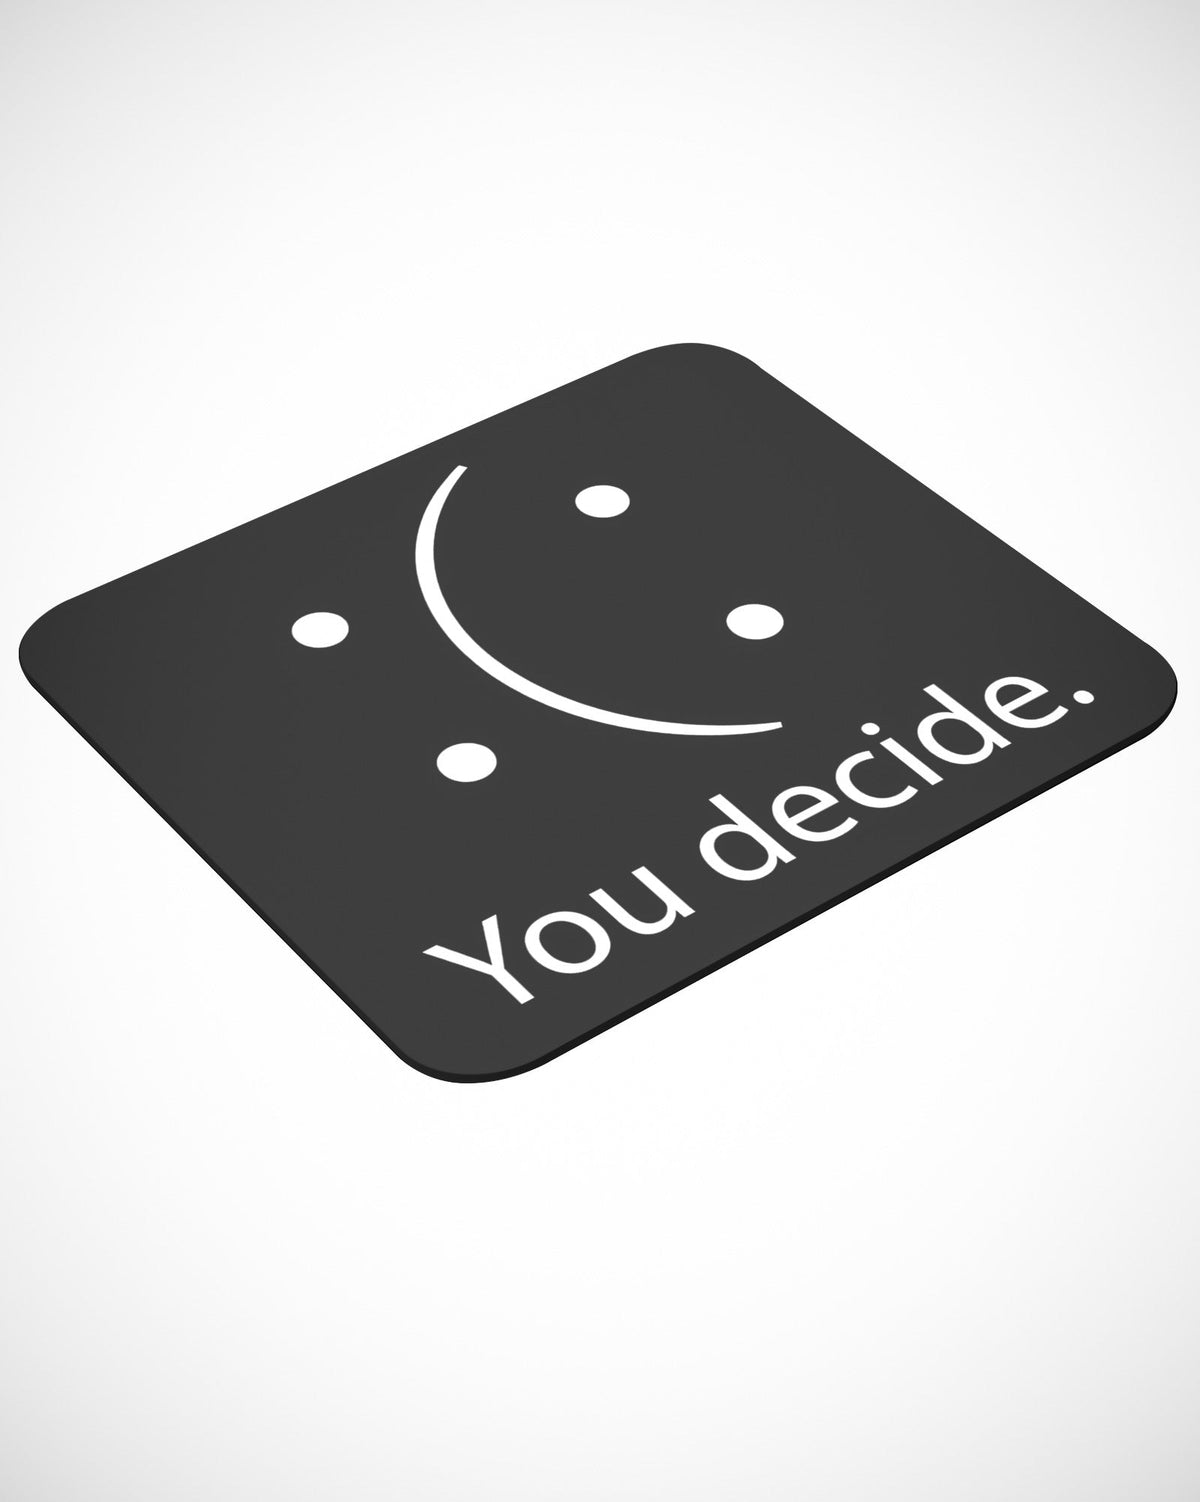 You Decide Mouse pad